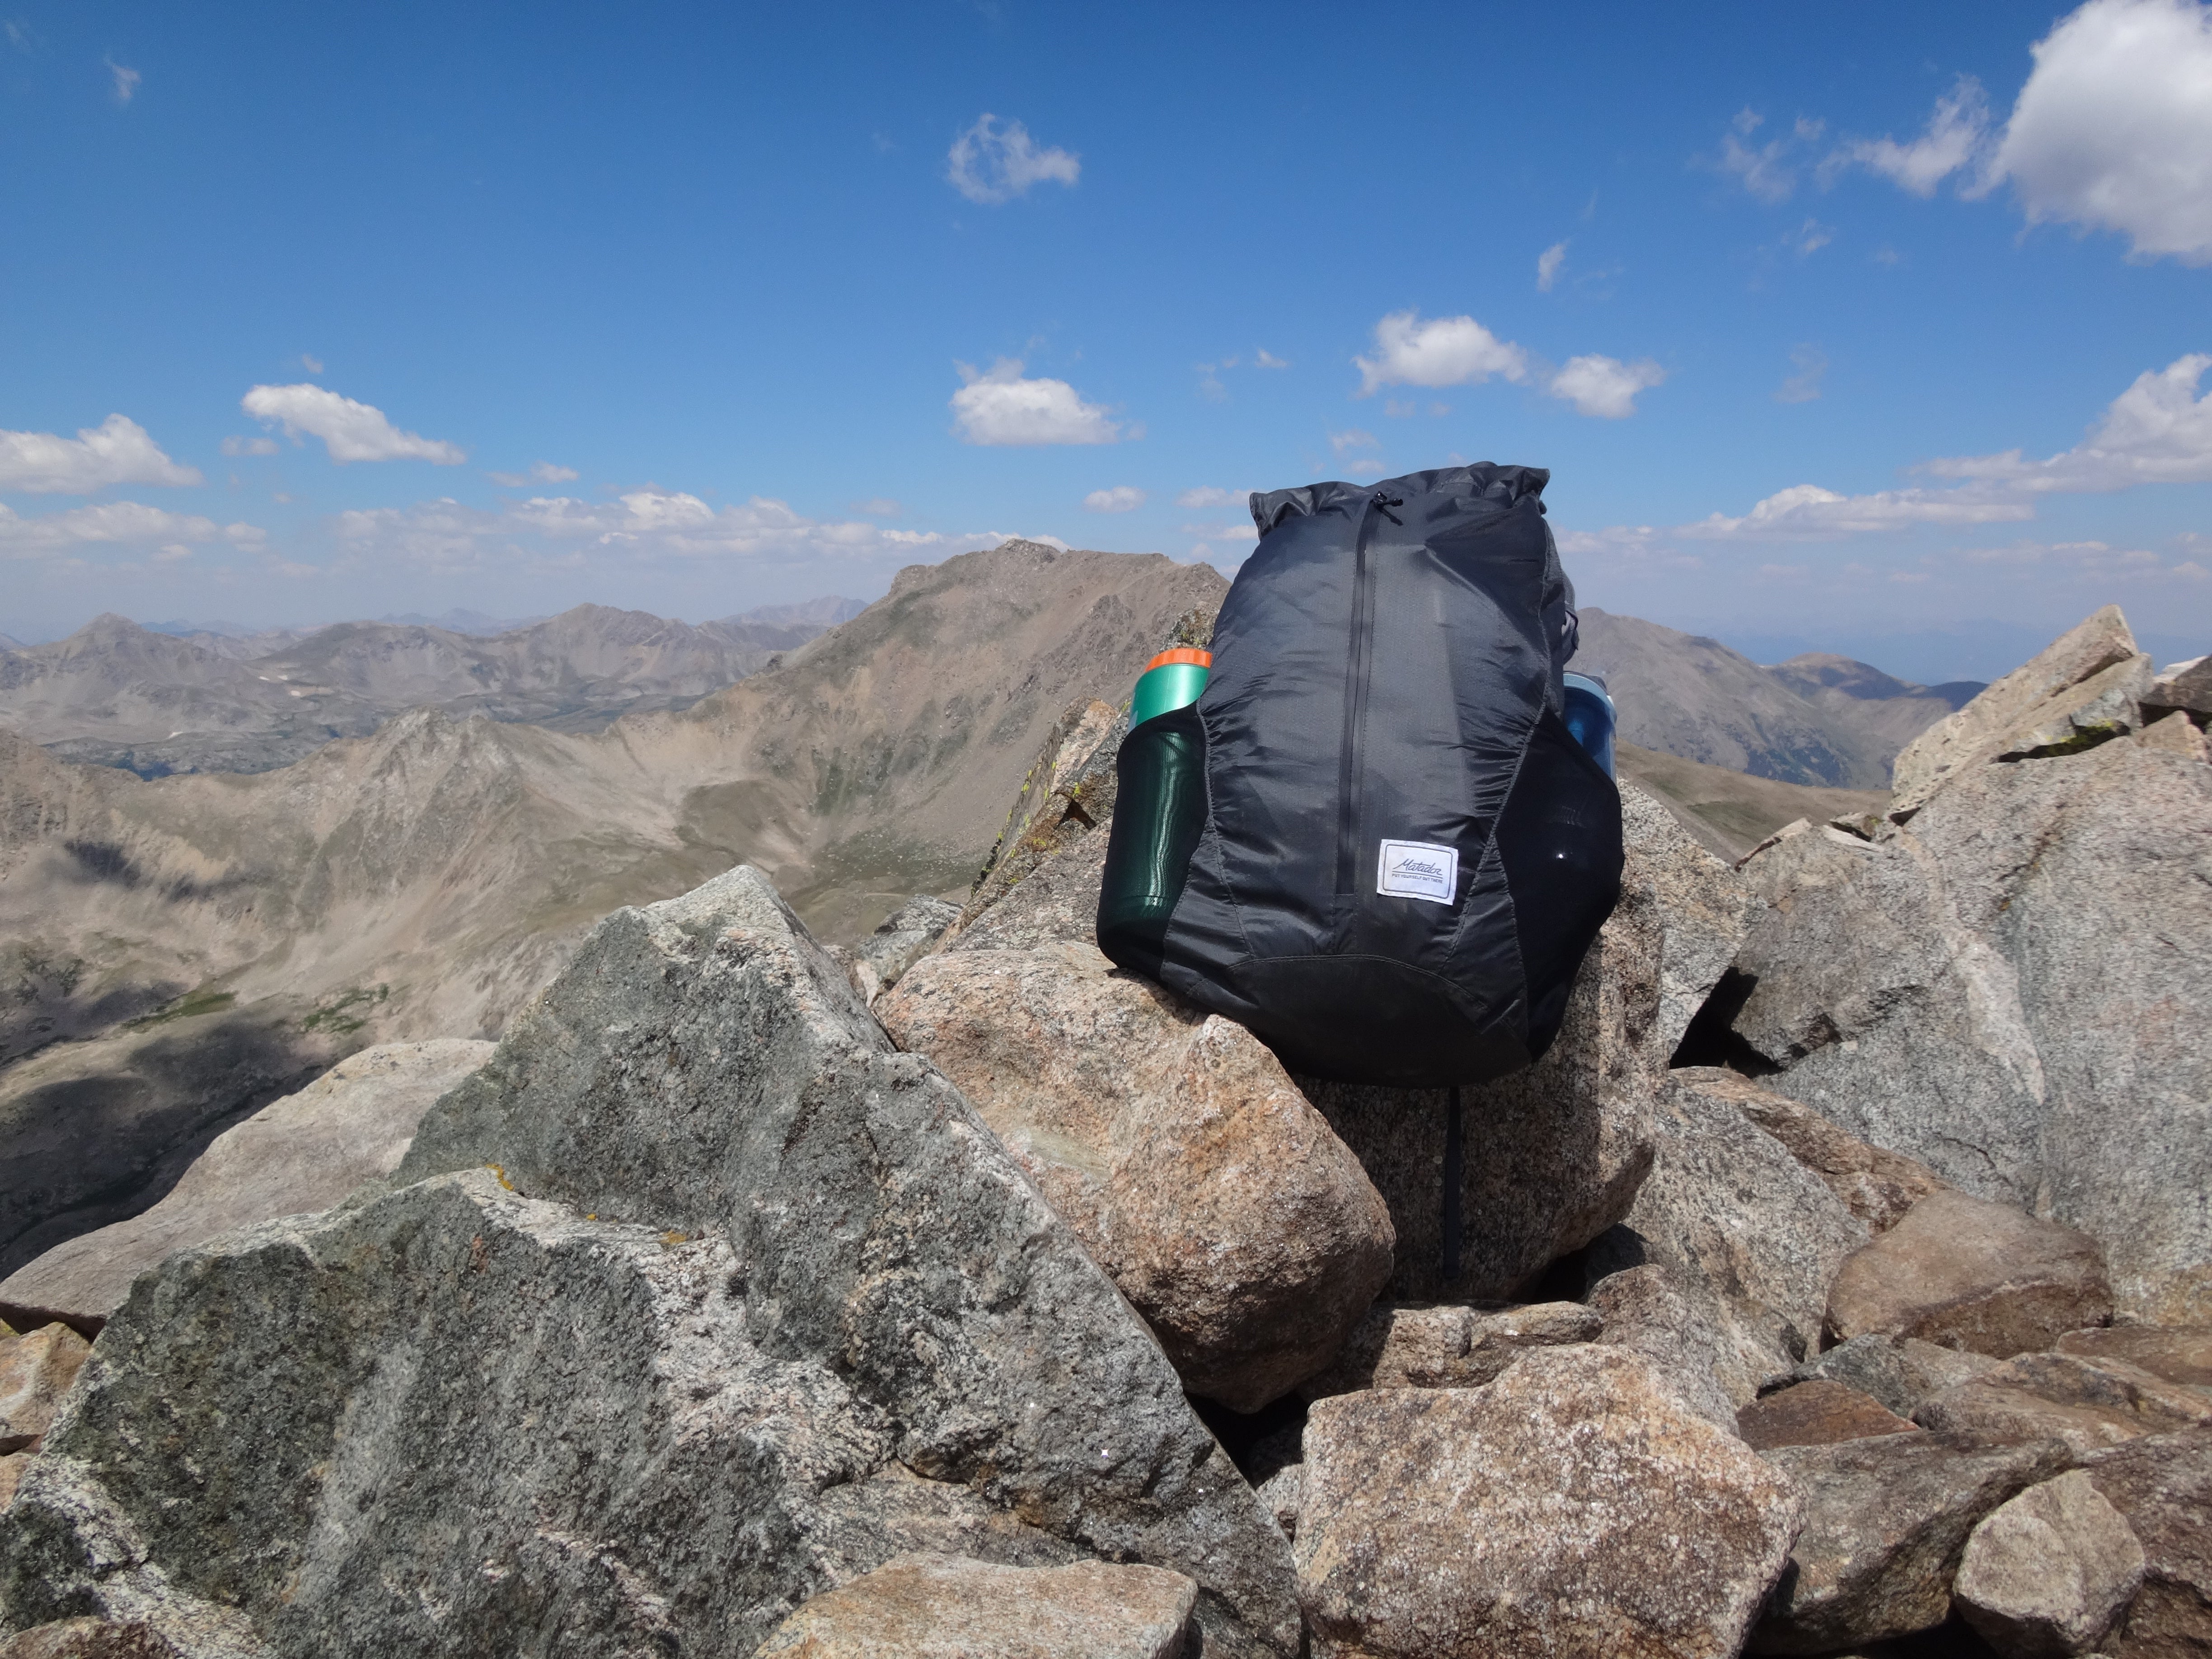 My Matador carried everything I needed to Mt Harvard and Mt Columbia!  Sitting pretty at 14,420 feet above sea level.